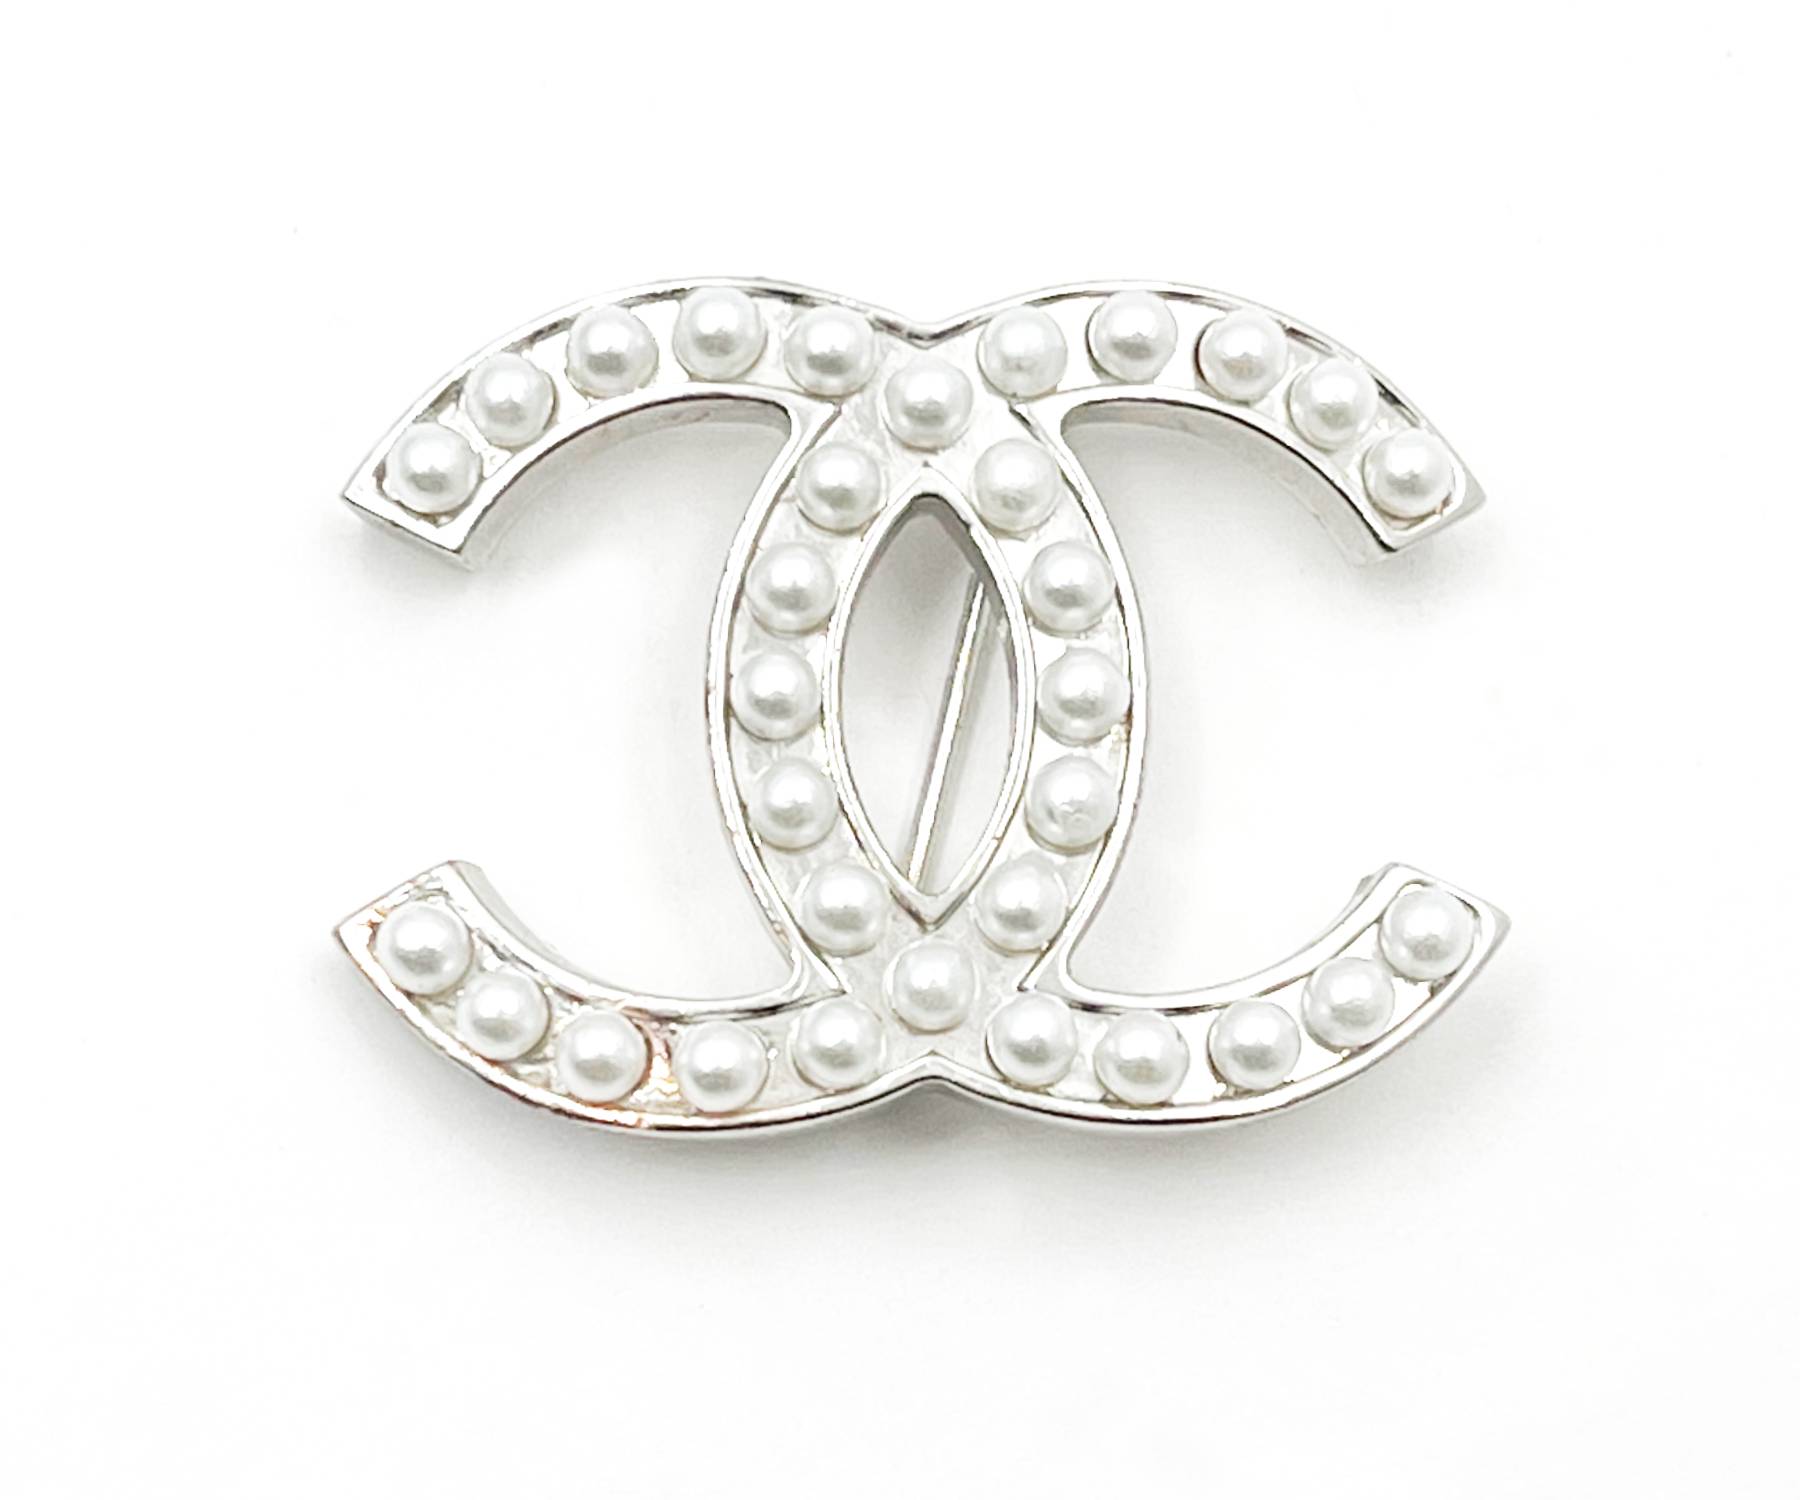 apparel pin for chanel brooch